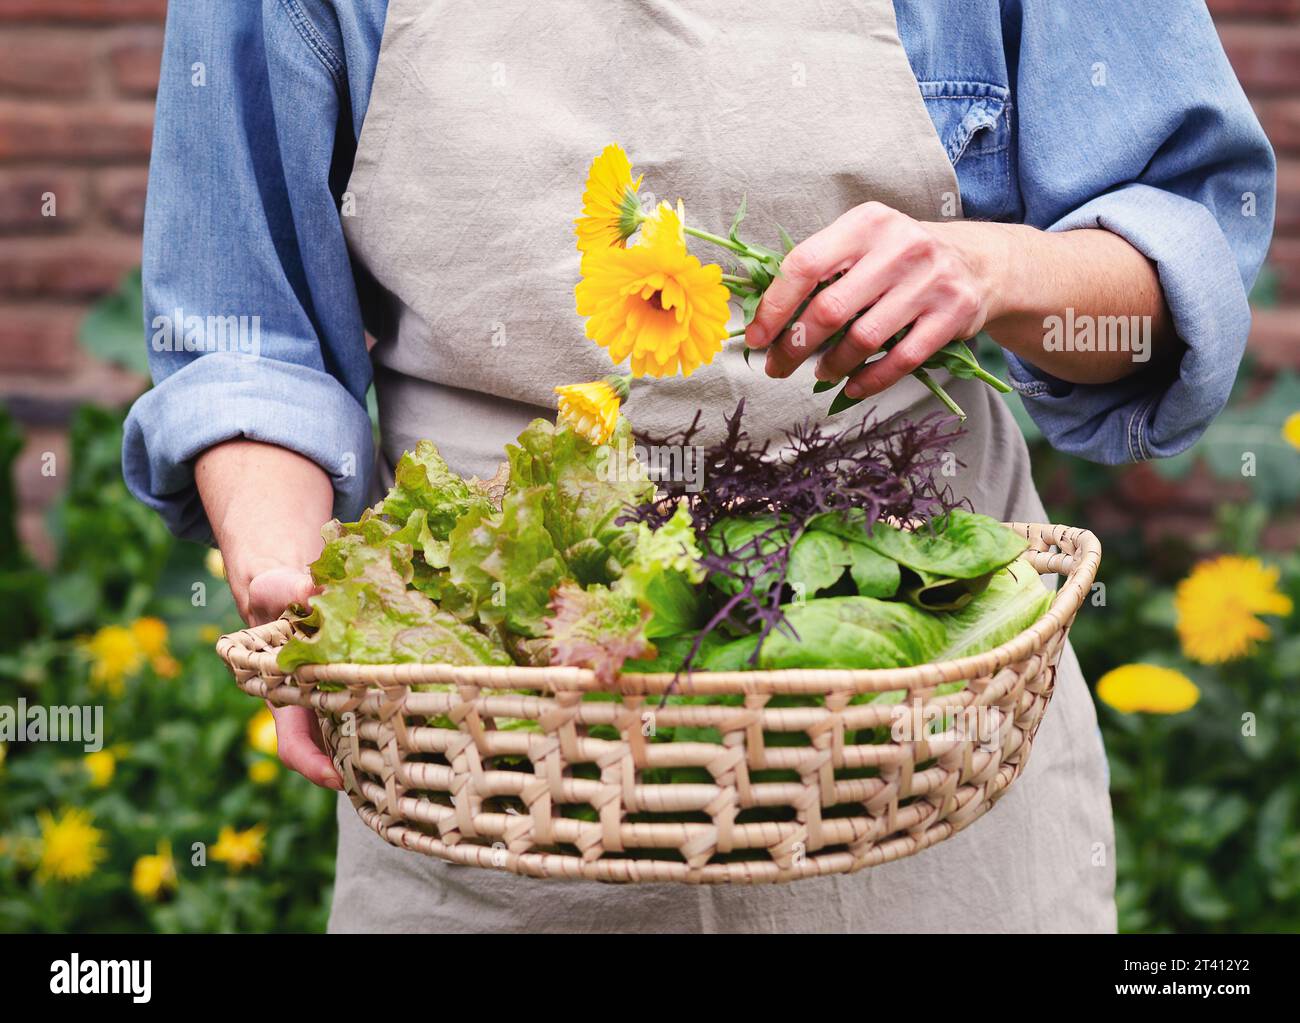 A woman holding a basket with fresh vegetables and flowers in an urban garden. Stock Photo